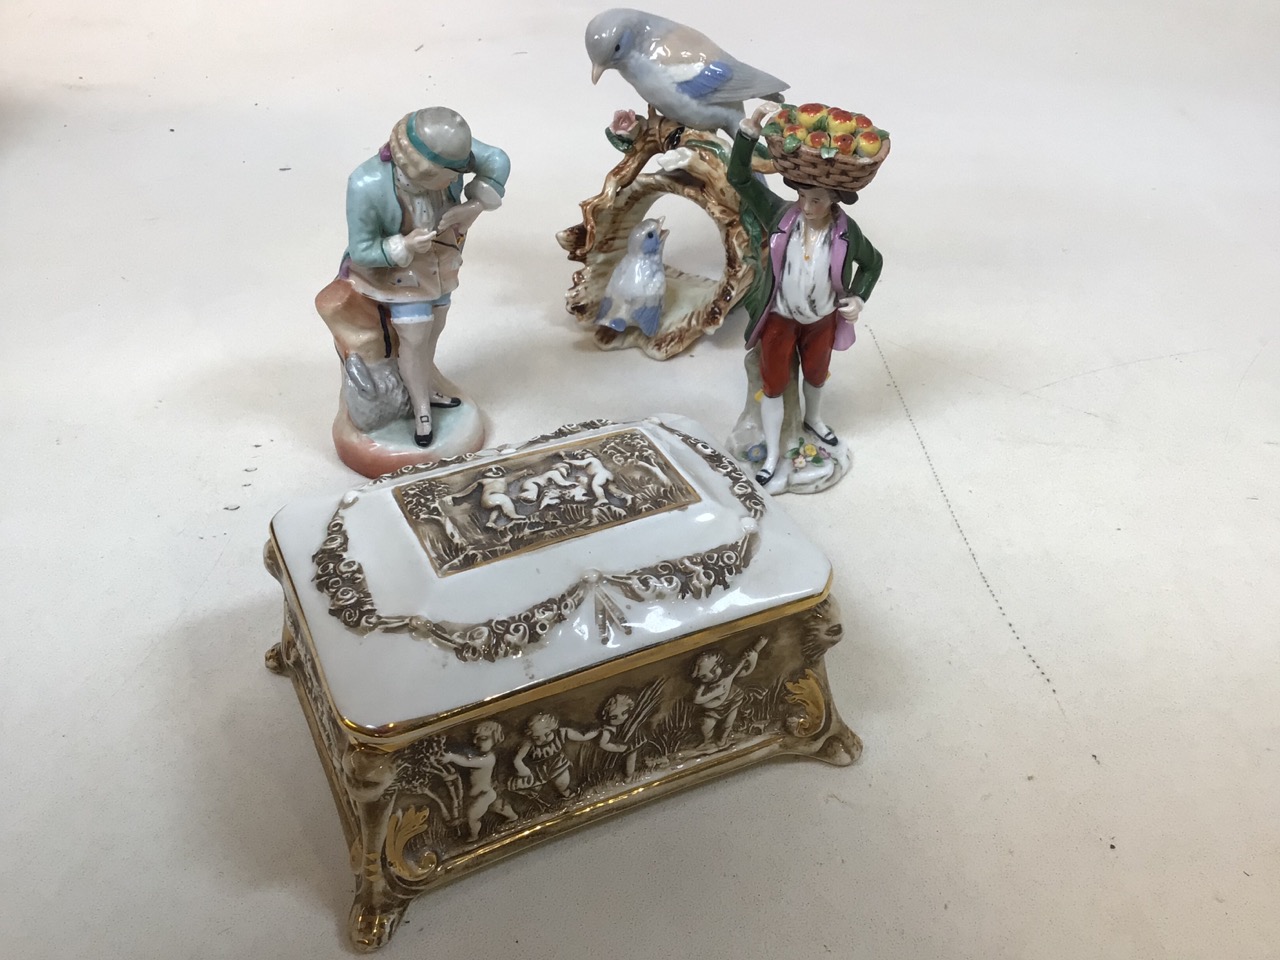 A Capodimonte footed lidded ceramic box decorated with children together with three decorative